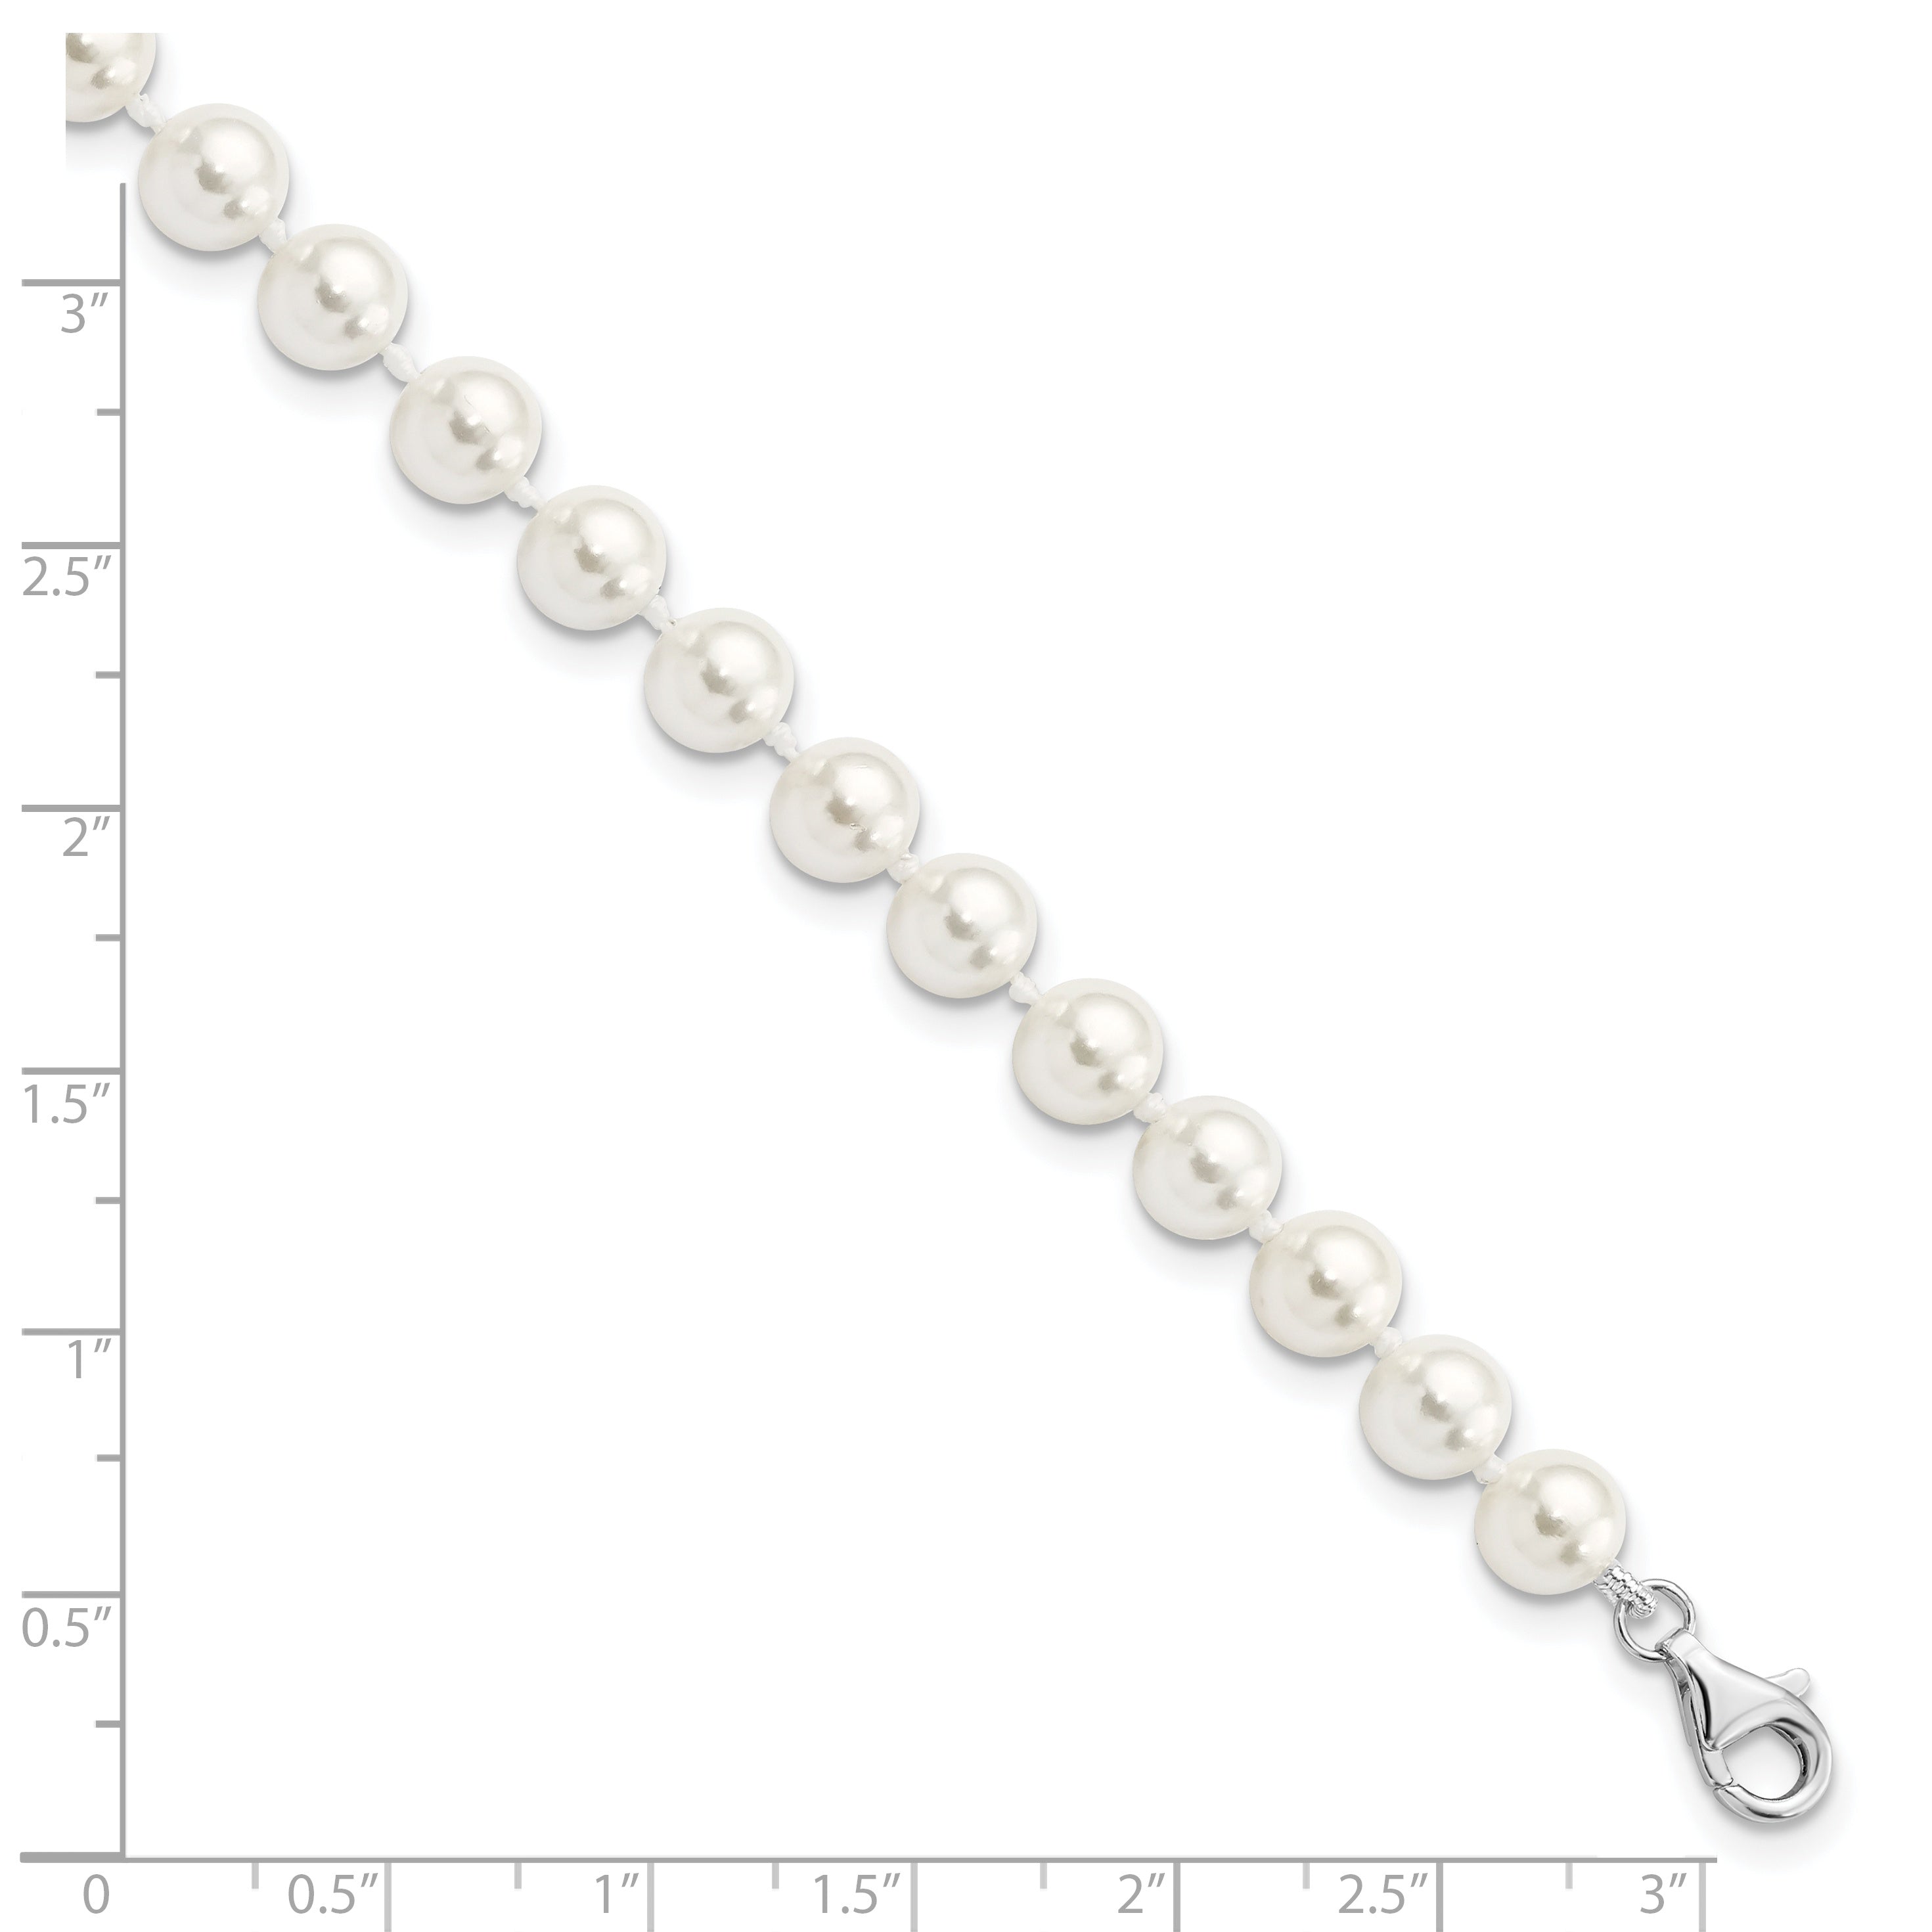 Majestik Sterling Silver Rhodium-plated 7-8mm Imitation Shell Pearl and CZ 8.5 inch Anklet with 2 inch Extender